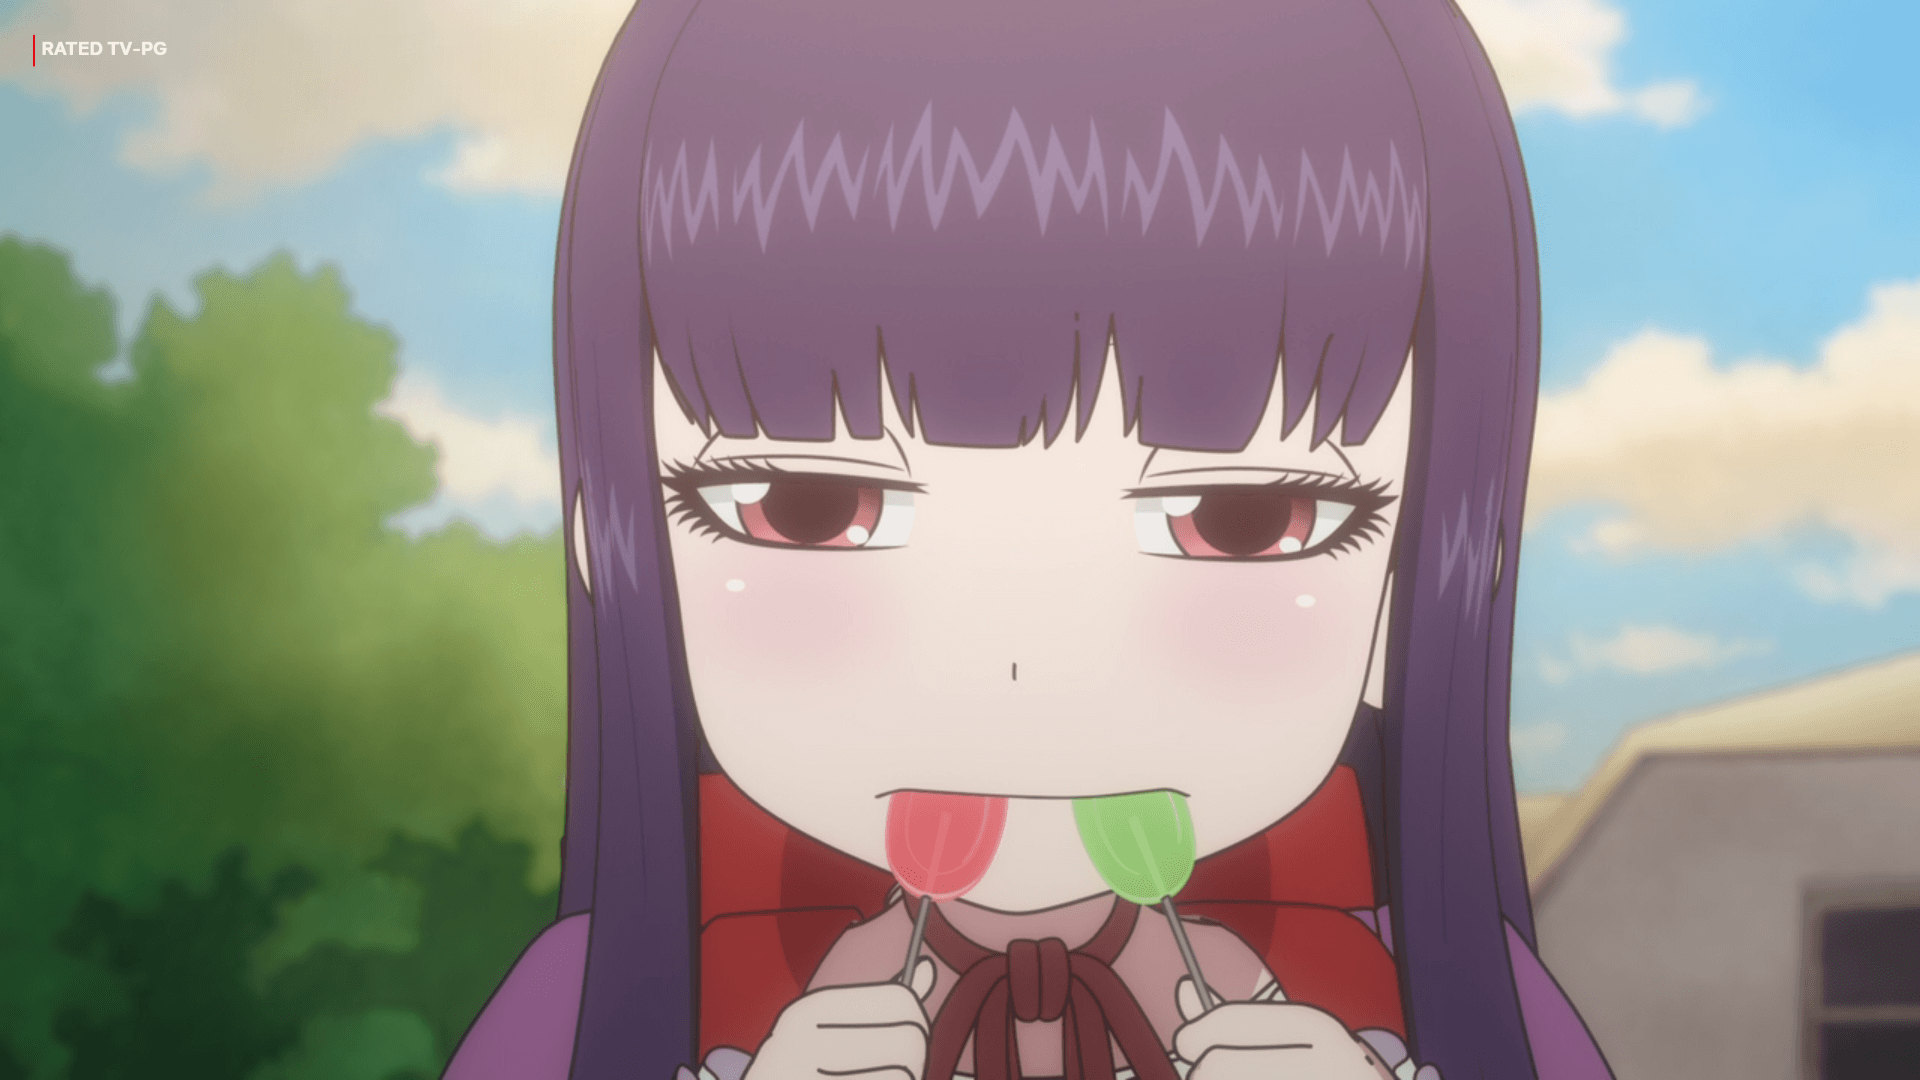 Hi Score Girl (Anime about 90s arcade gaming.) finally up on Netflix